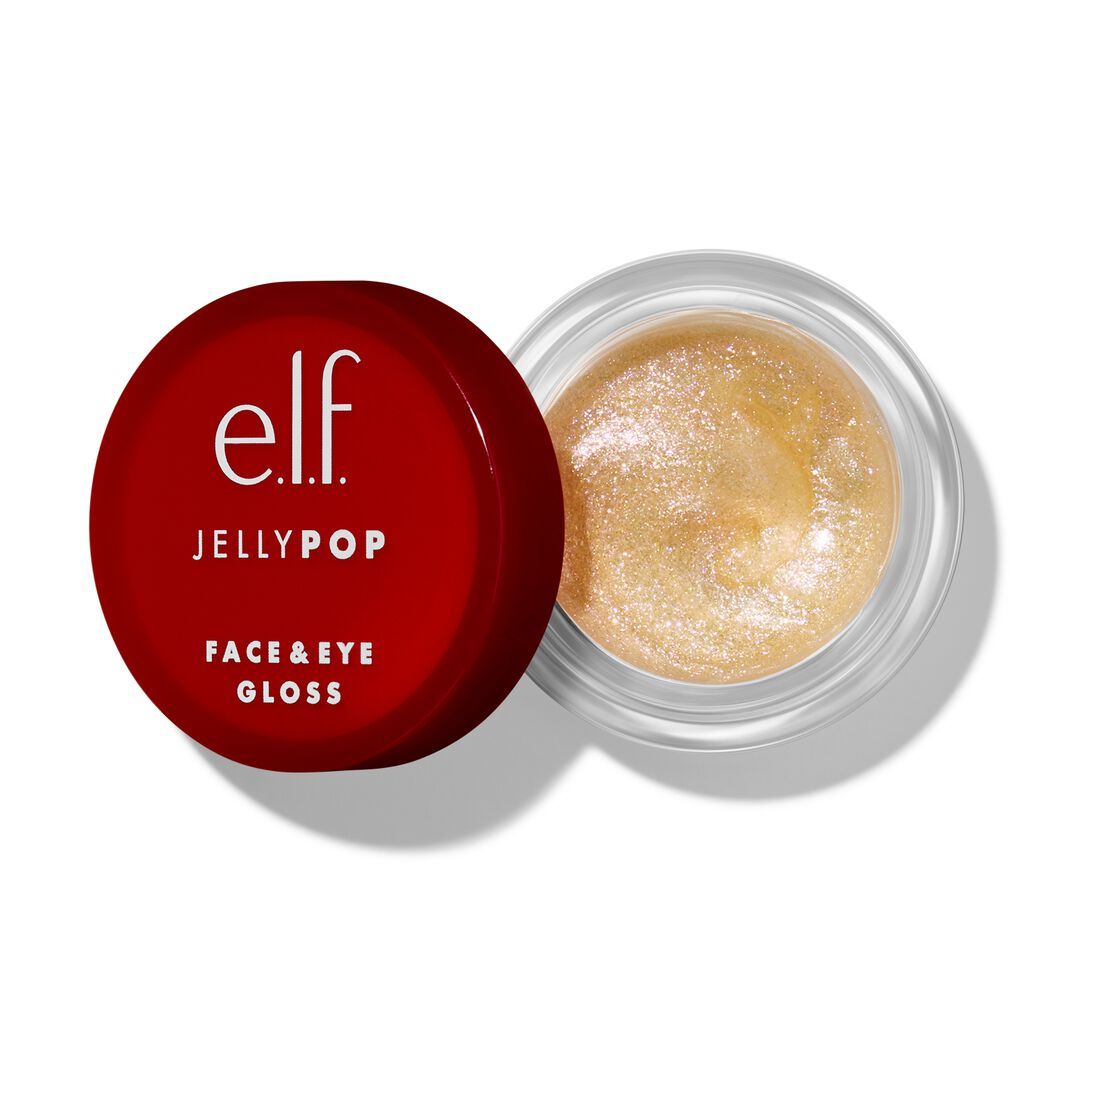 Jelly Pop Face and Eye Gloss | e.l.f. cosmetics (US)